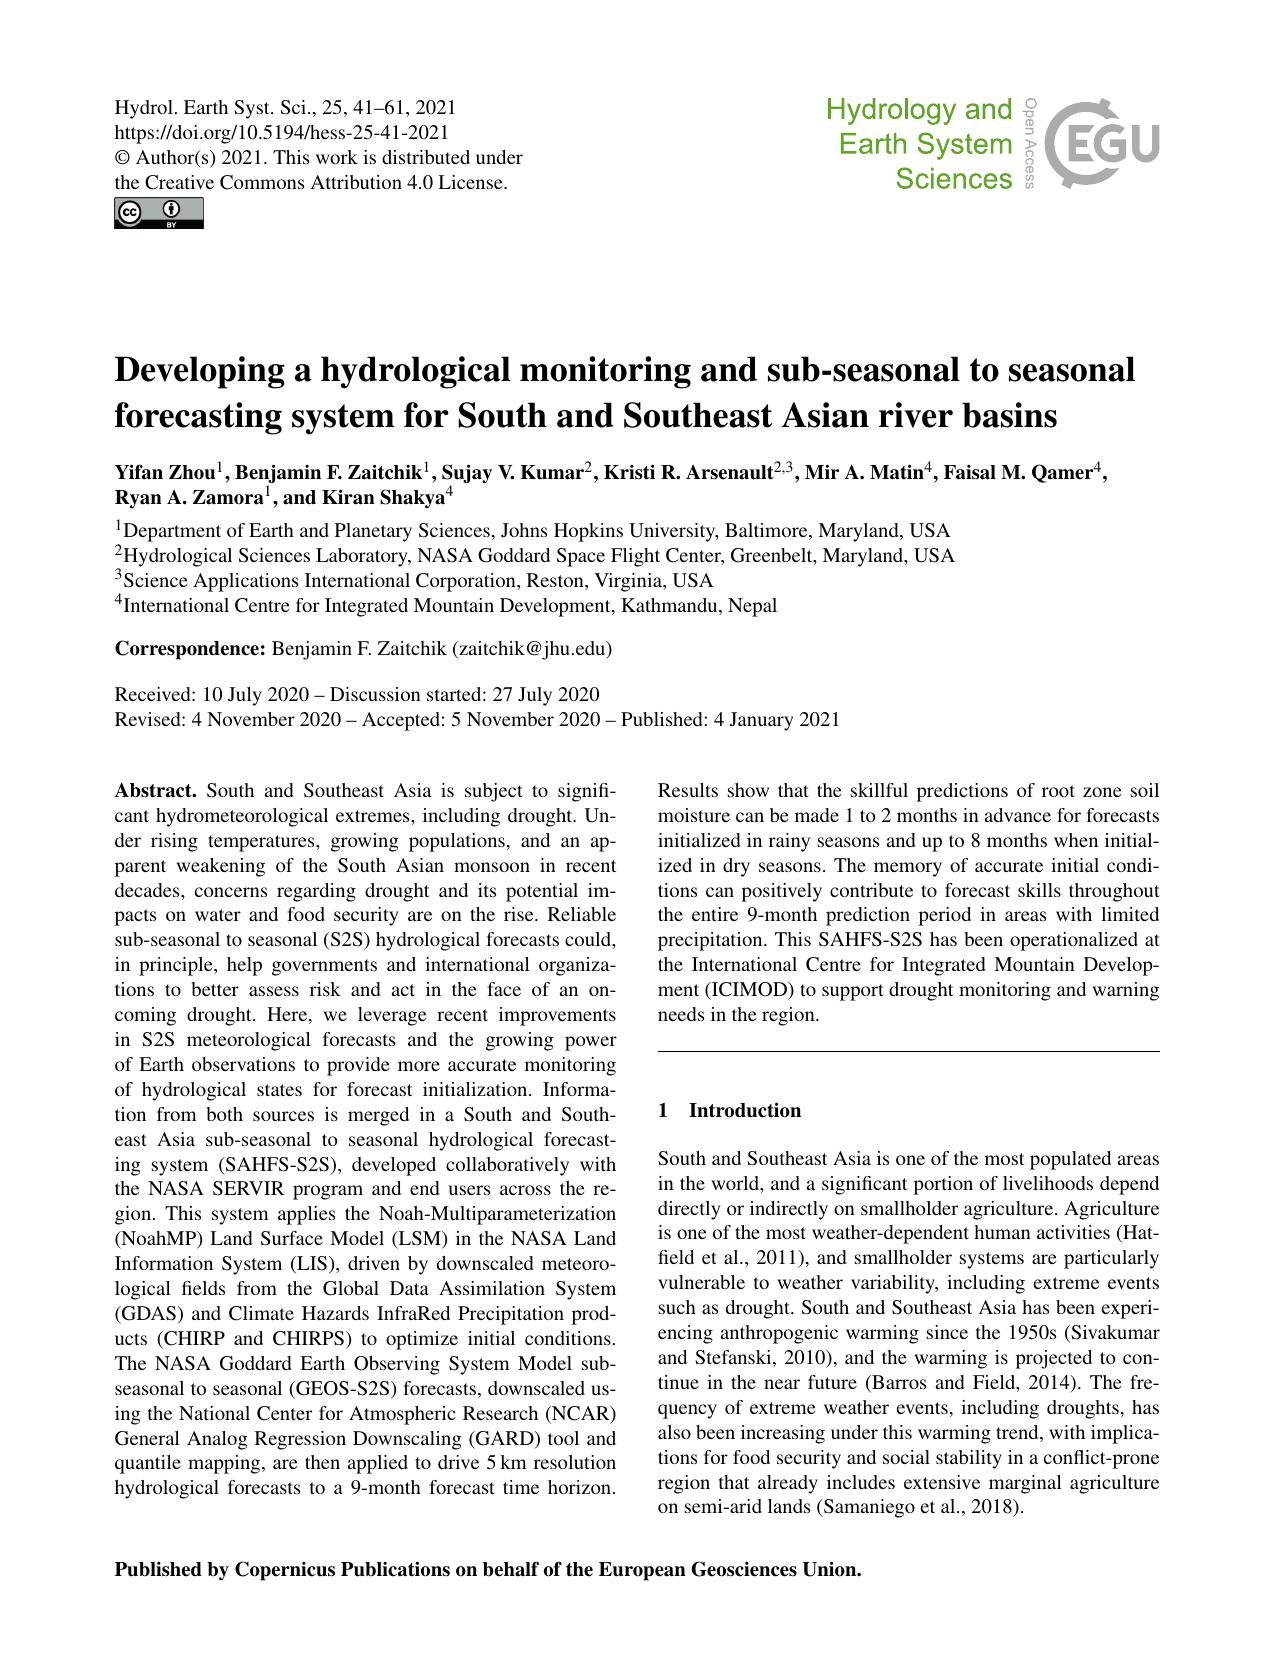 Developing a hydrological monitoring and sub-seasonal to seasonal forecasting system for South and Southeast Asian river basins